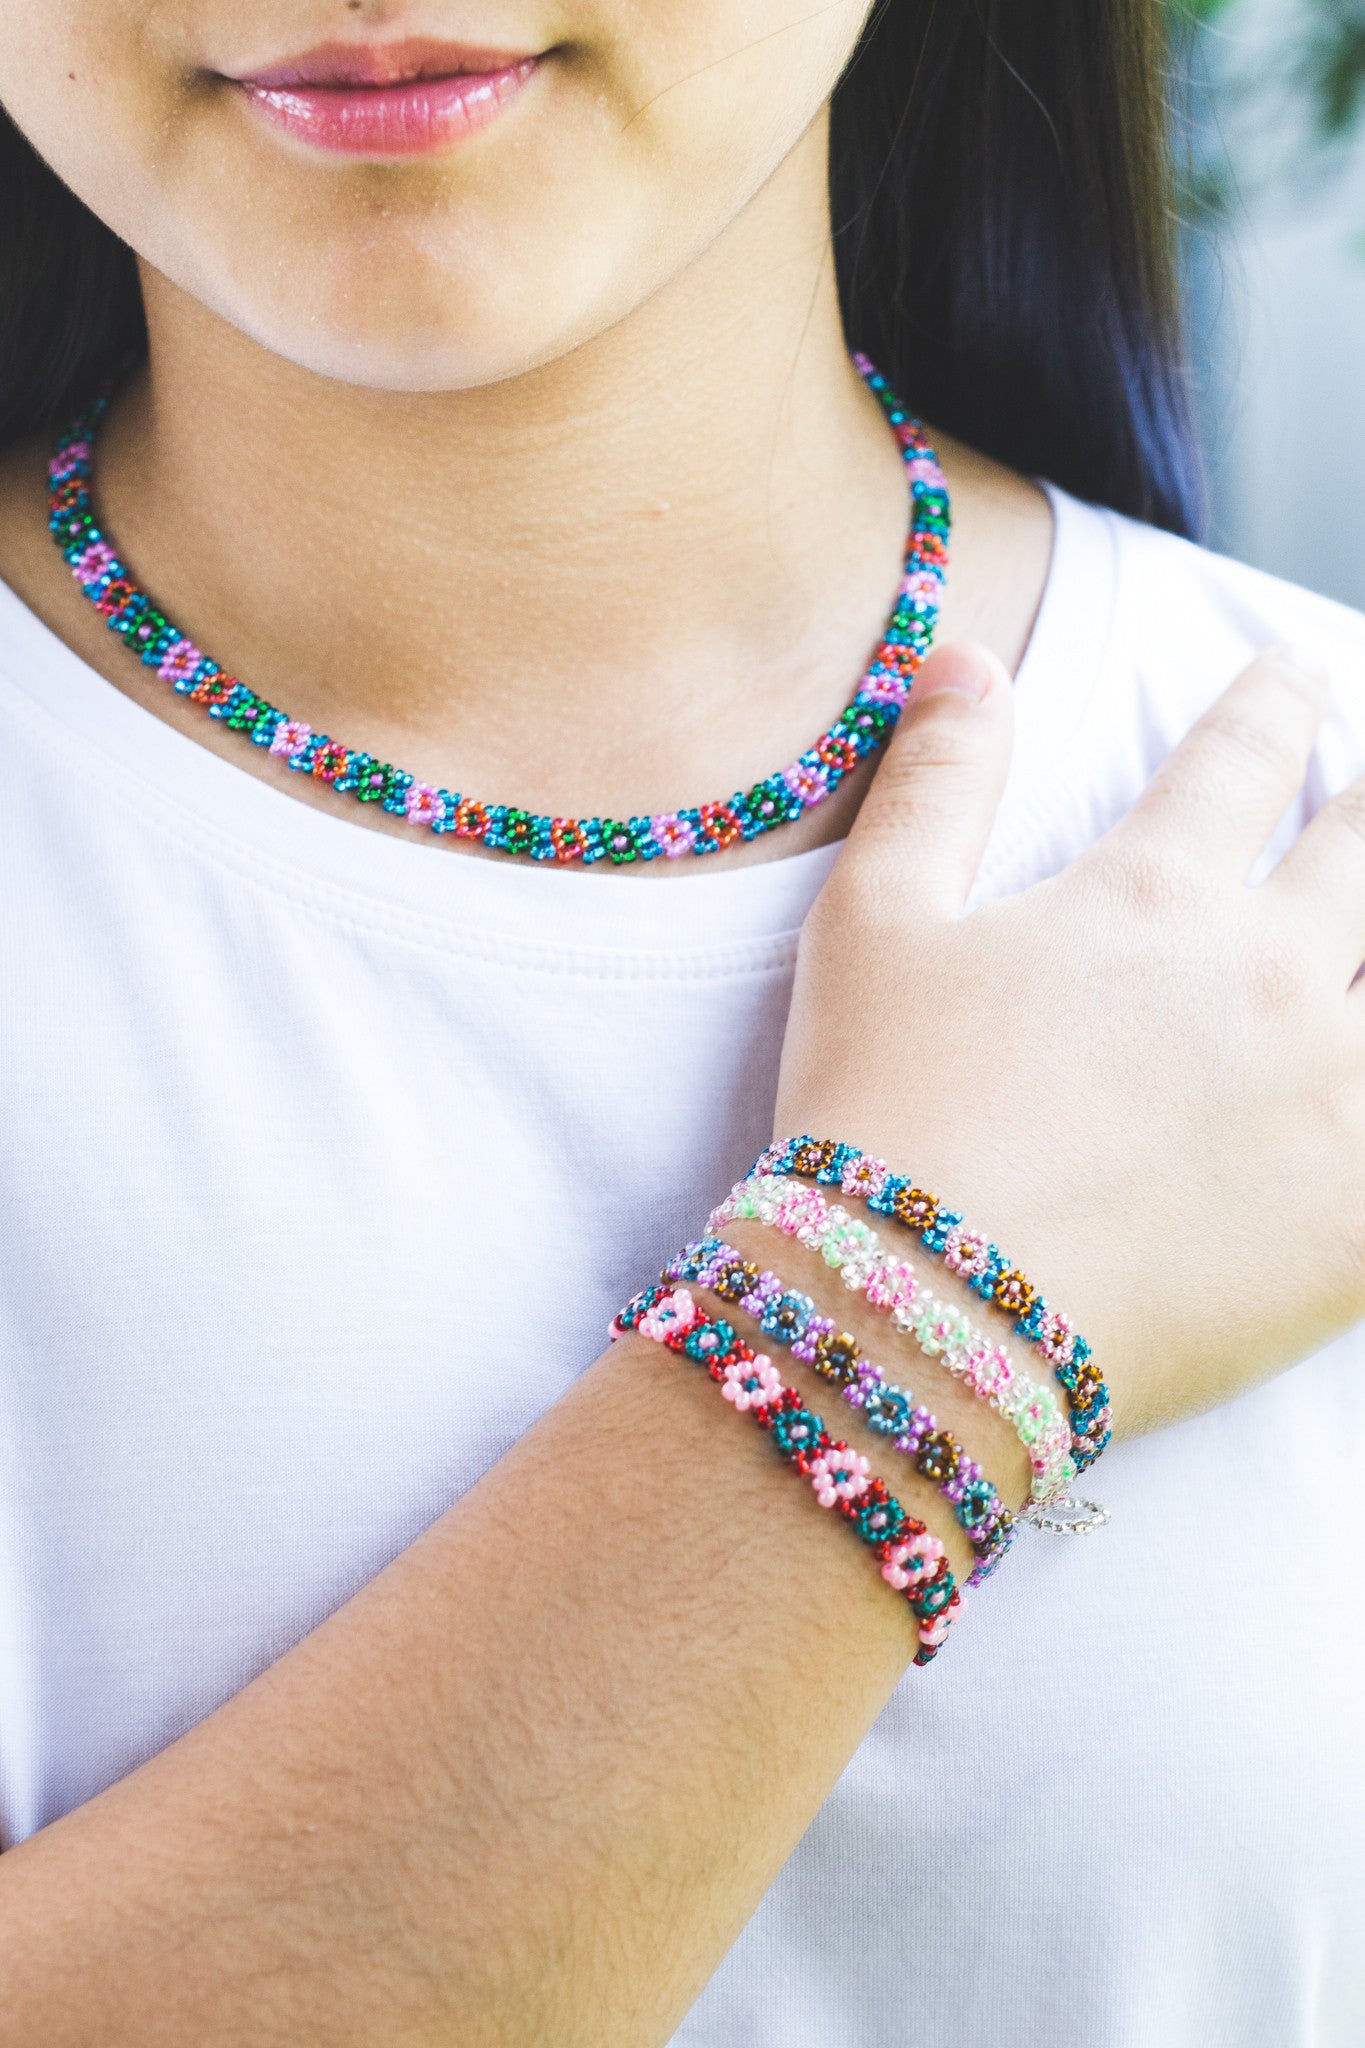 Handmade, fair Trade Bracelet Made with Seed Beads from Guatemala